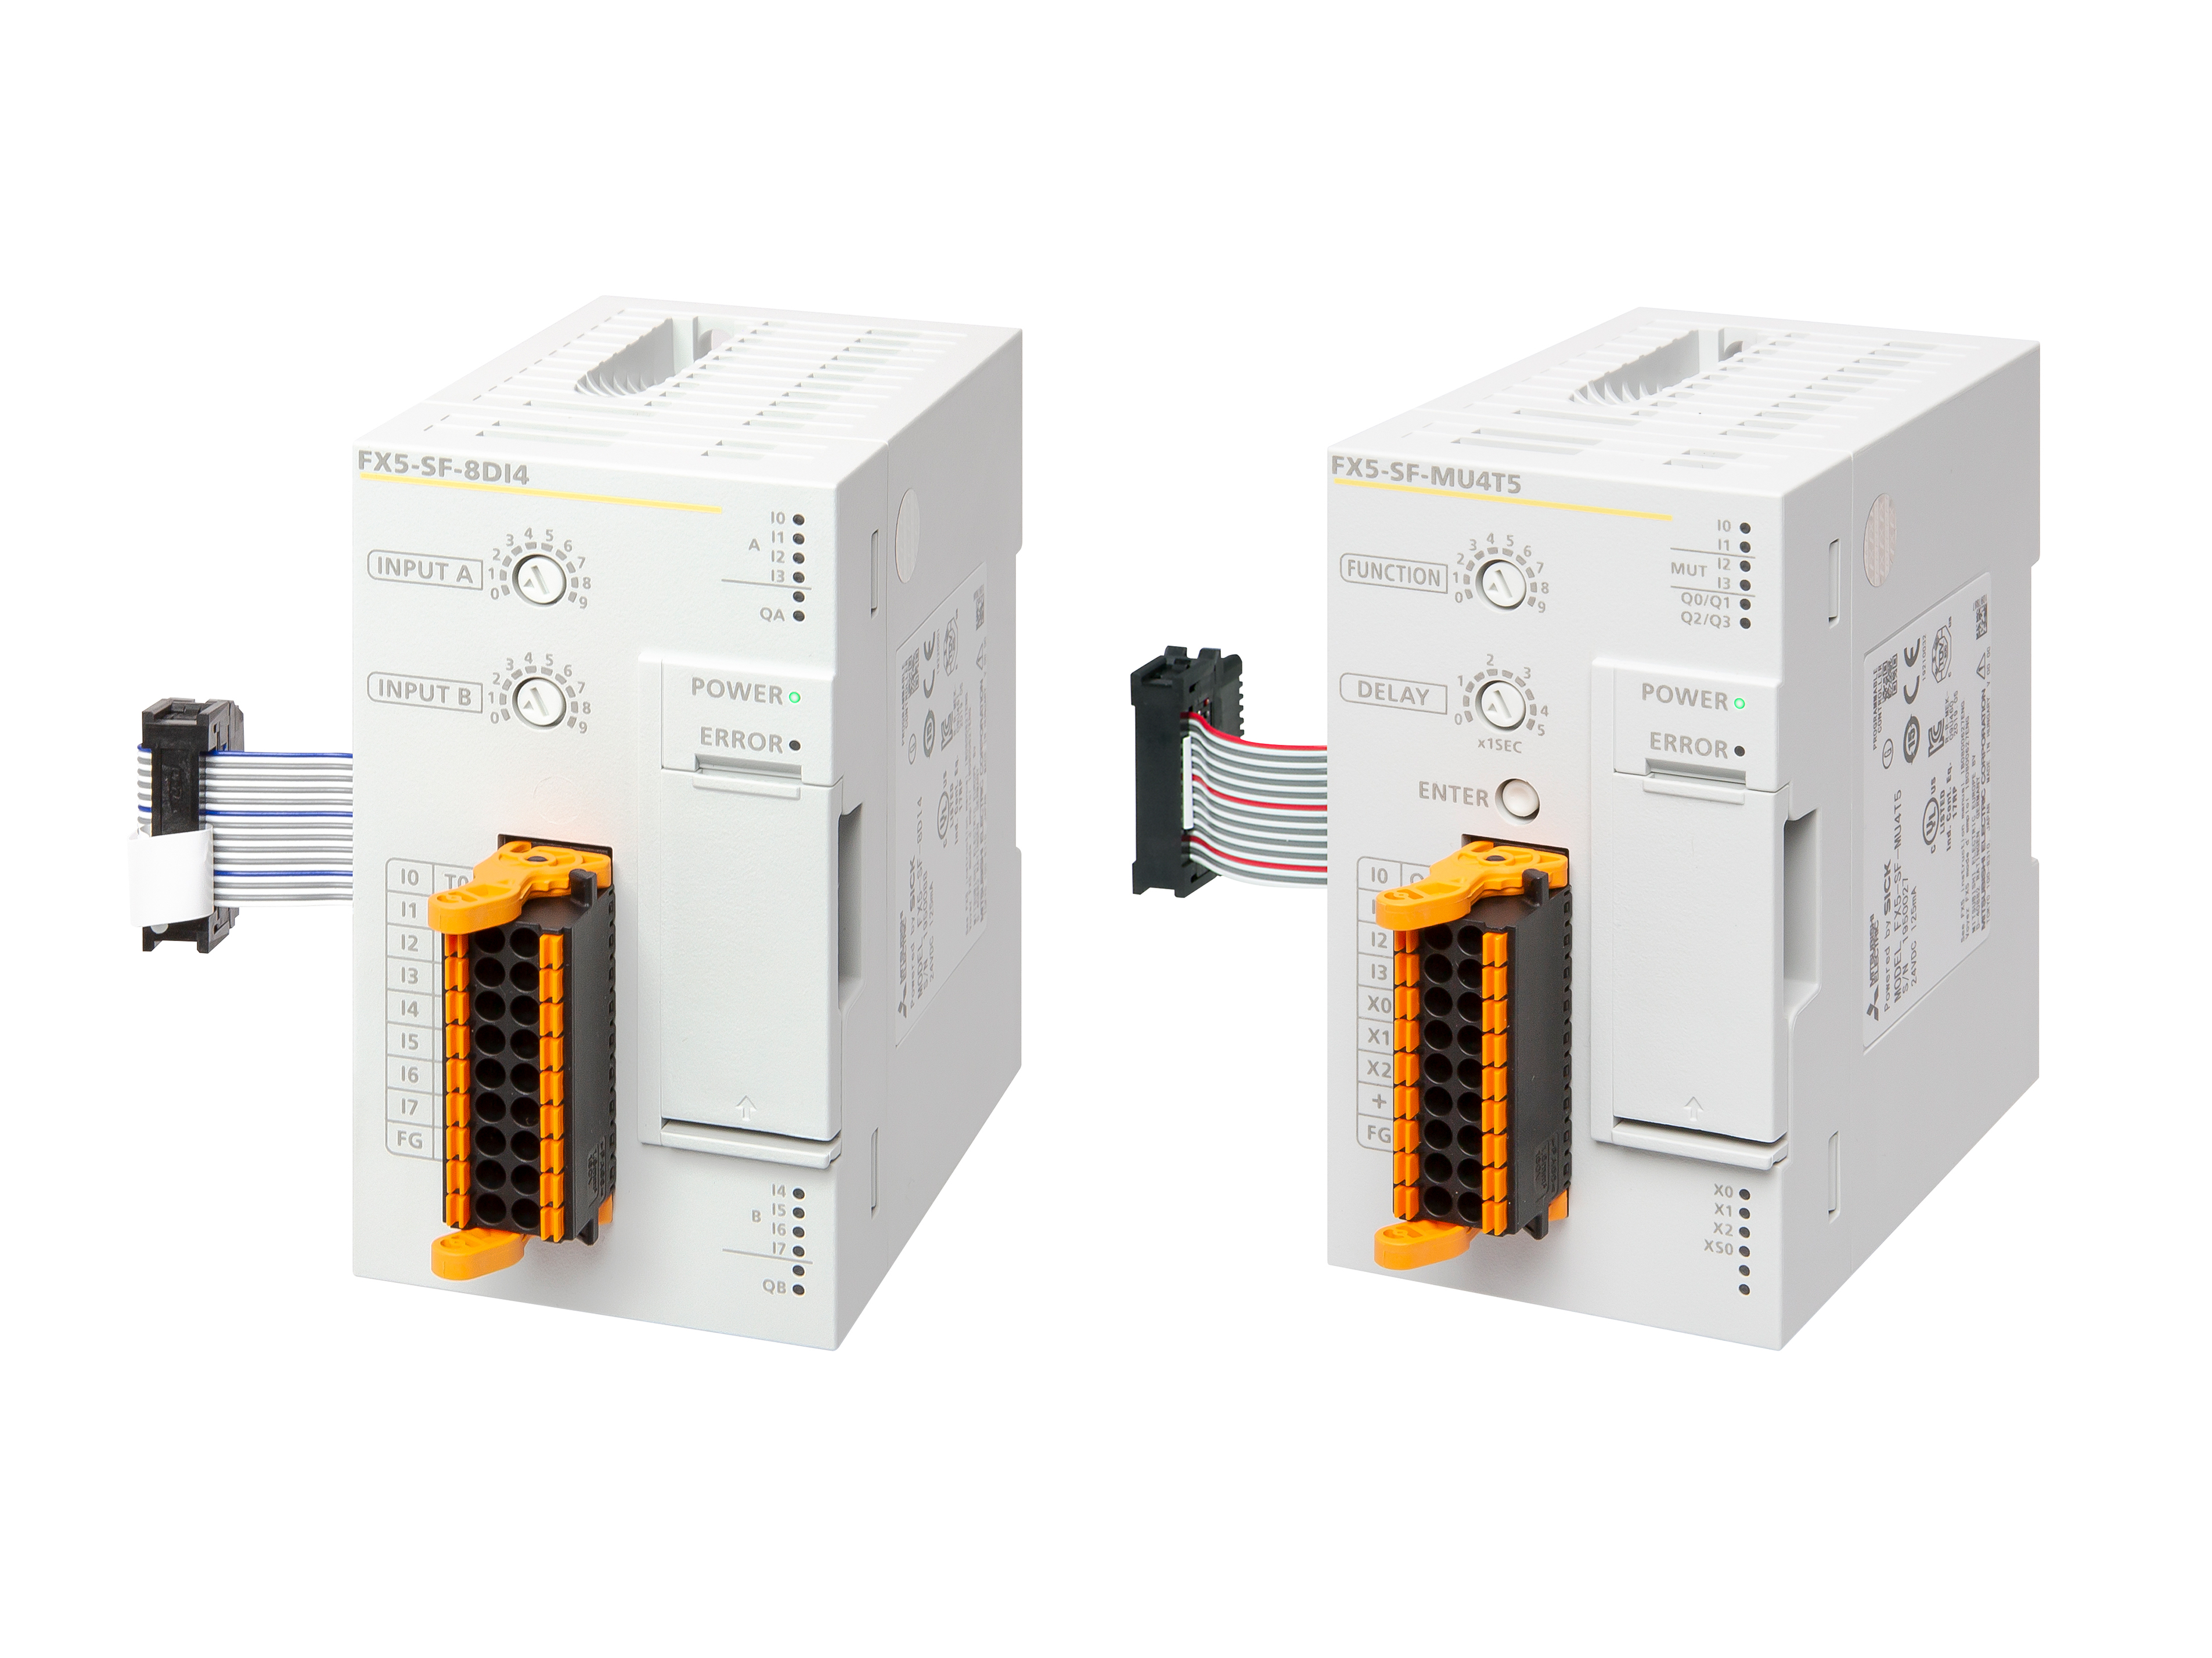 Two new safety modules for Mitsubishi Electric’s compact PLCs form the basis of an integrated safety system. [Source: Mitsubishi Electric Europe B.V.]